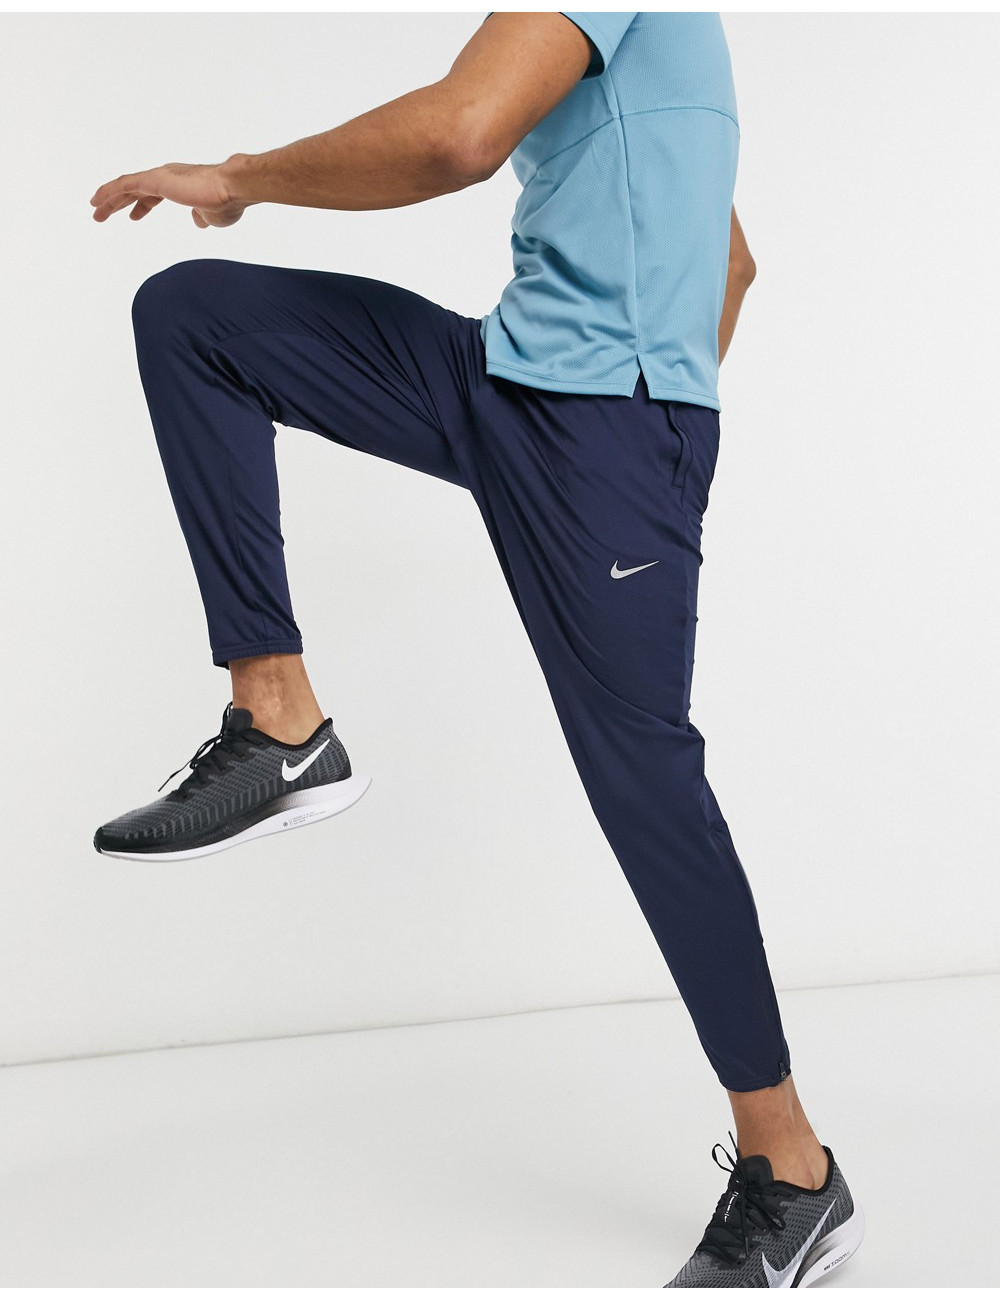 Nike Running joggers in navy